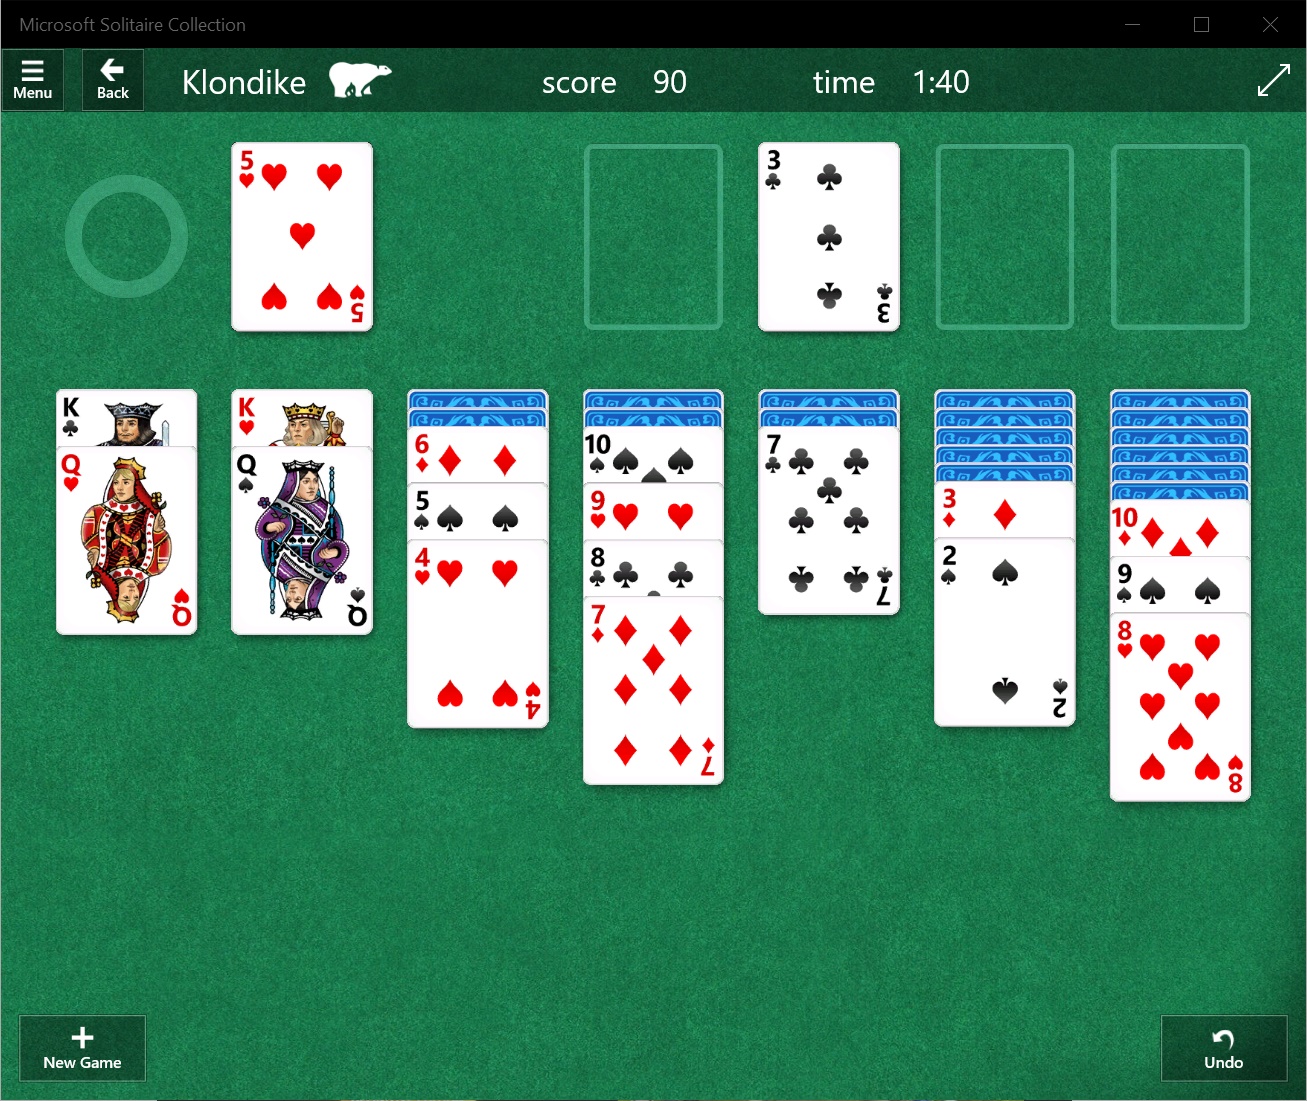 microsoft solitaire collection how to quit a game